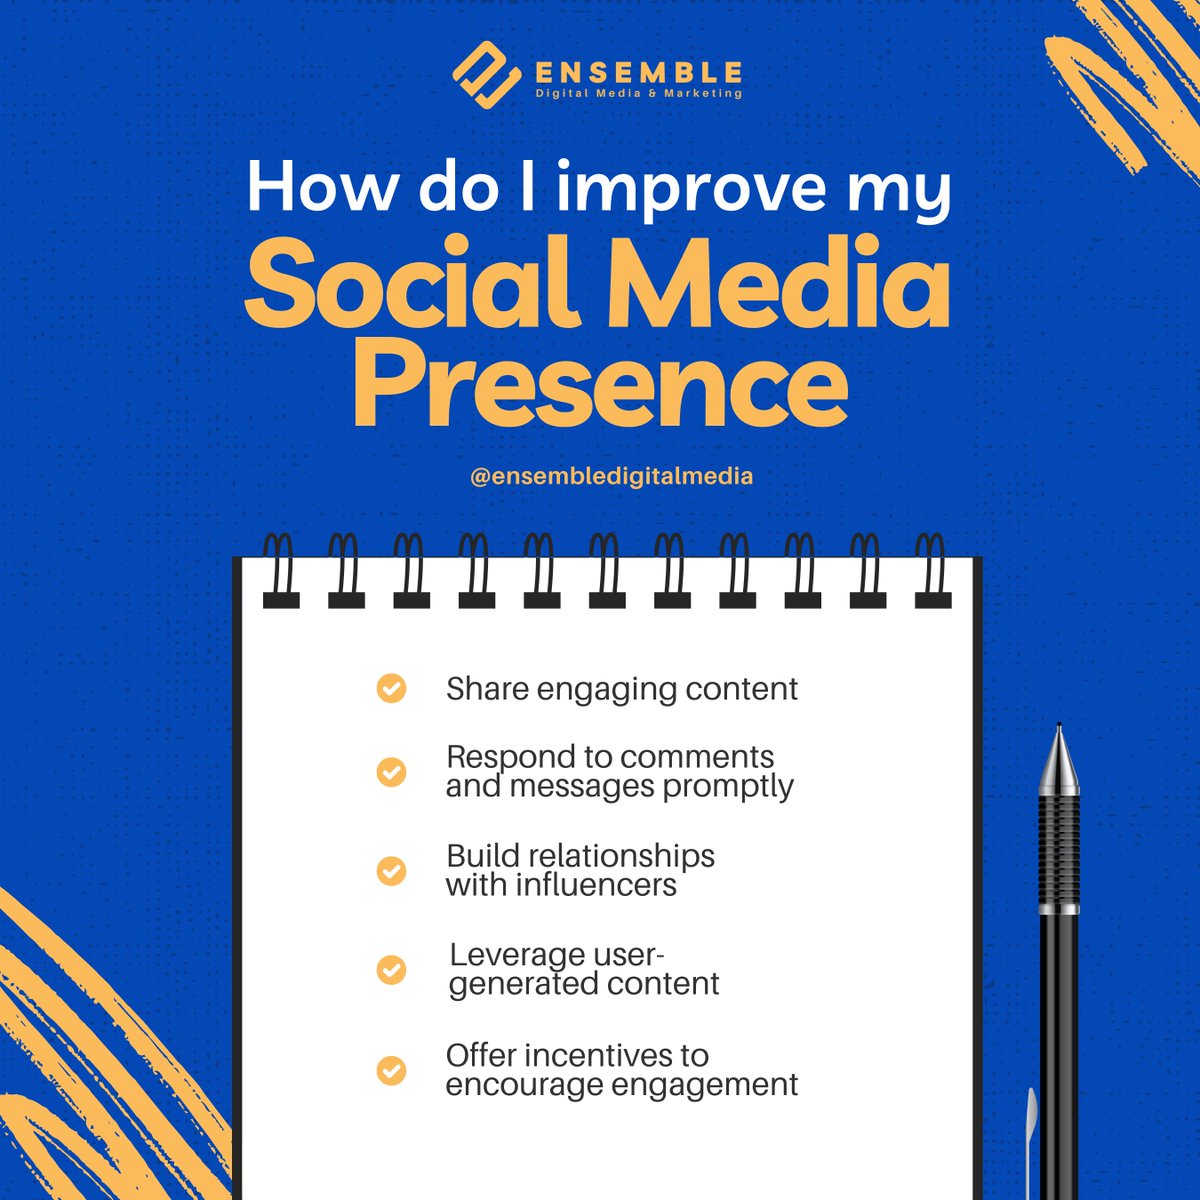 From building connections to boosting visibility, mastering the art of social media presence is key. Learn how to level up your strategy and watch your brand shine brighter than ever! 💫

#SocialMediaPresence #BuildingConnections #MaximizeVisibility #edm #socialmedia